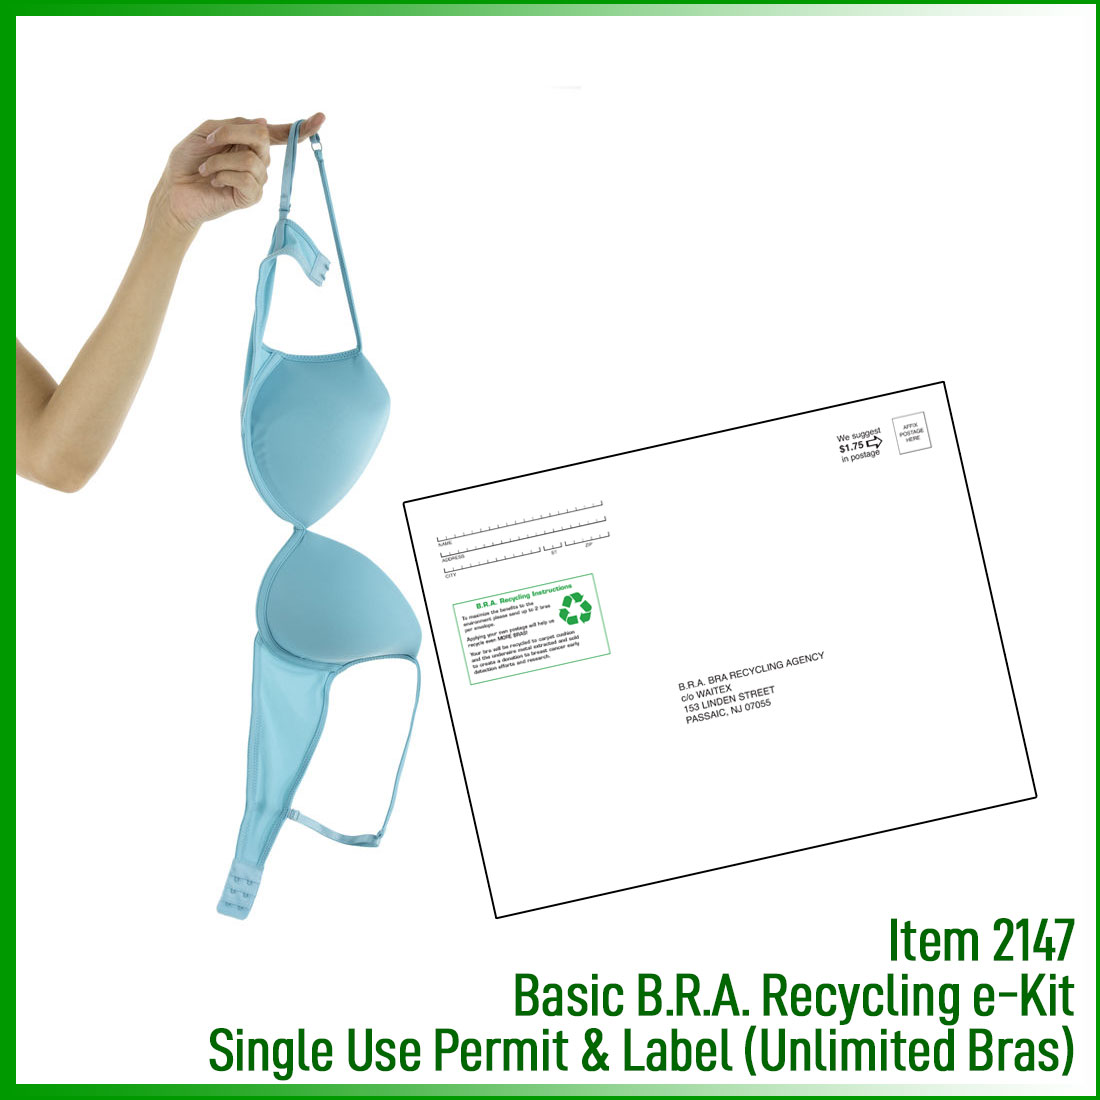 B.R.A. Fundraiser Benefiting Beautiful Self Org  Bra Recycling Agency  B.R.A. Founded By Kathleen Kirkwood